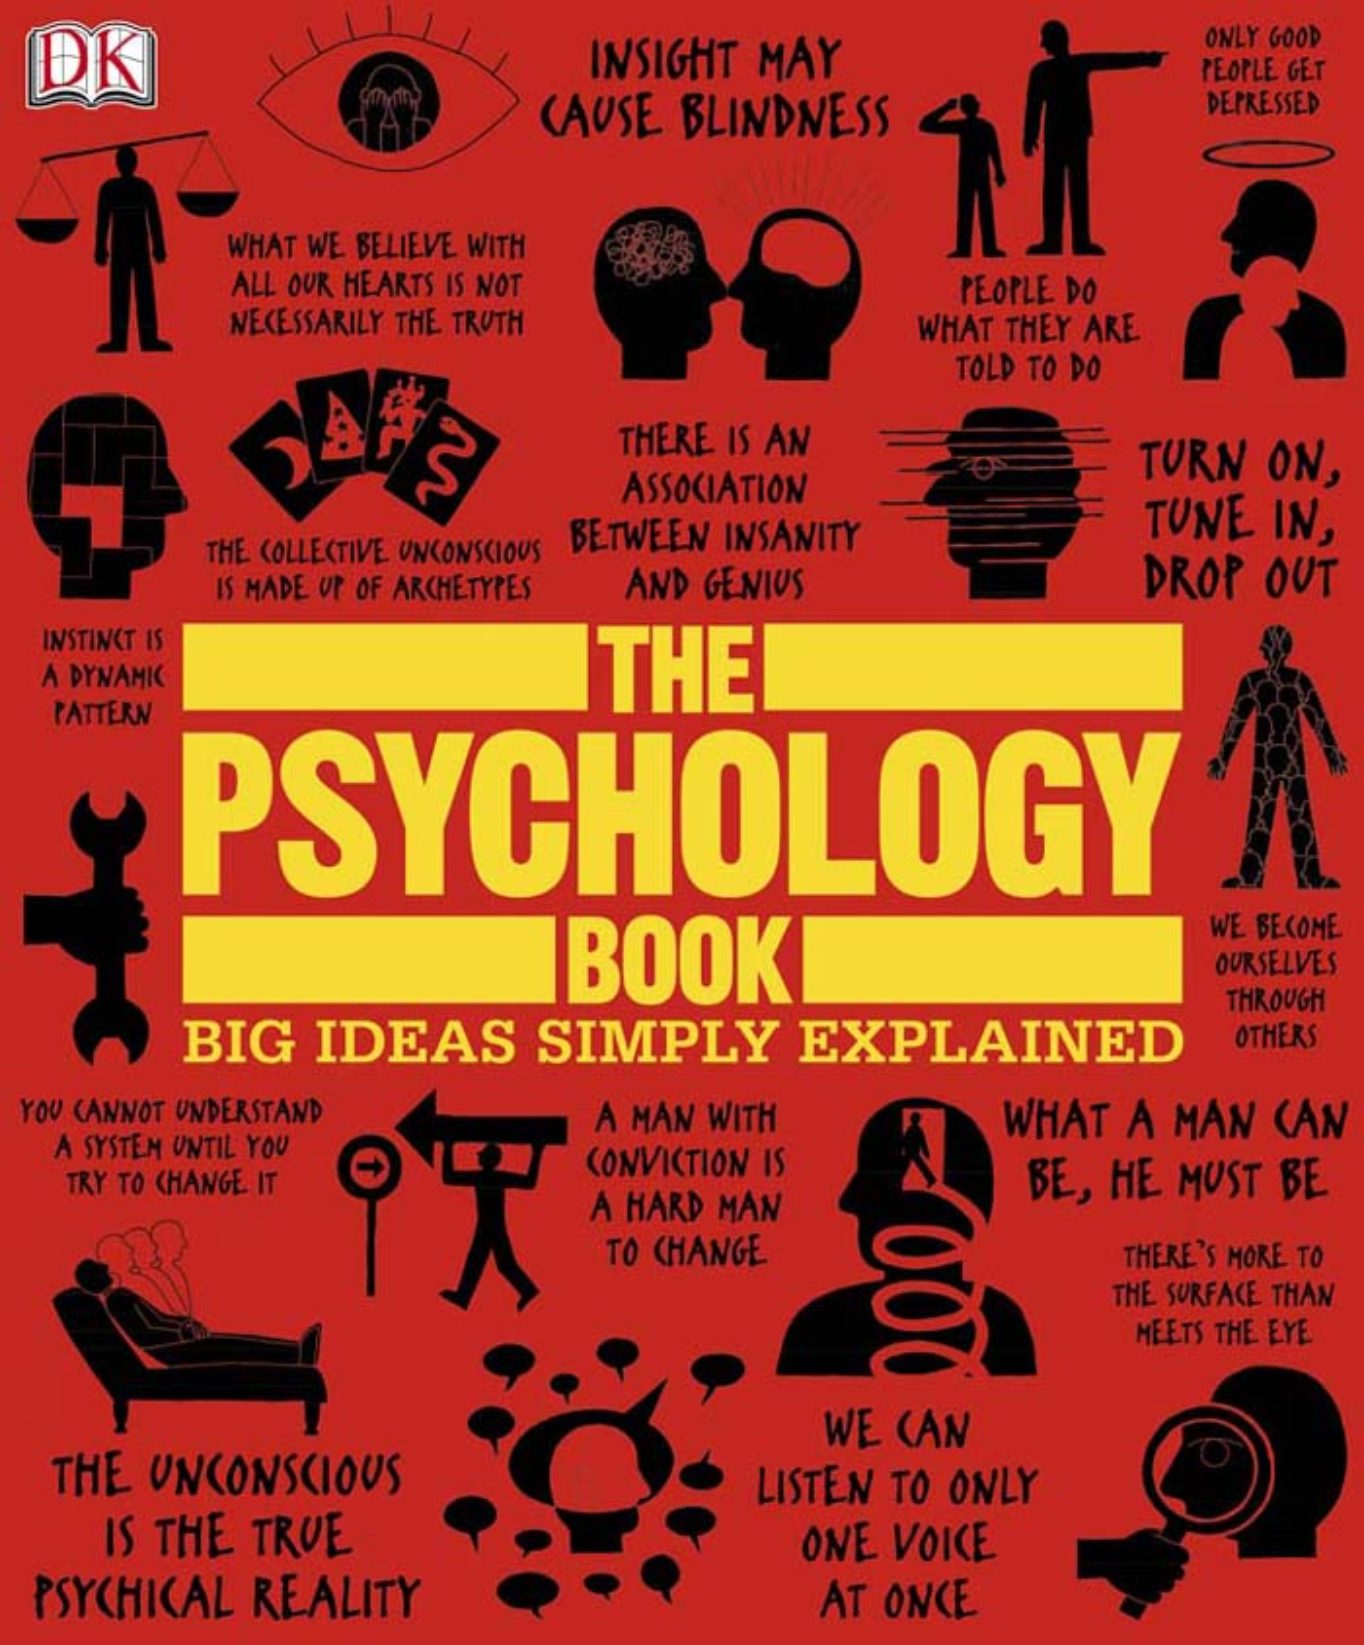 Rich Results on Google's SERP when searching for 'The Psychology Book'